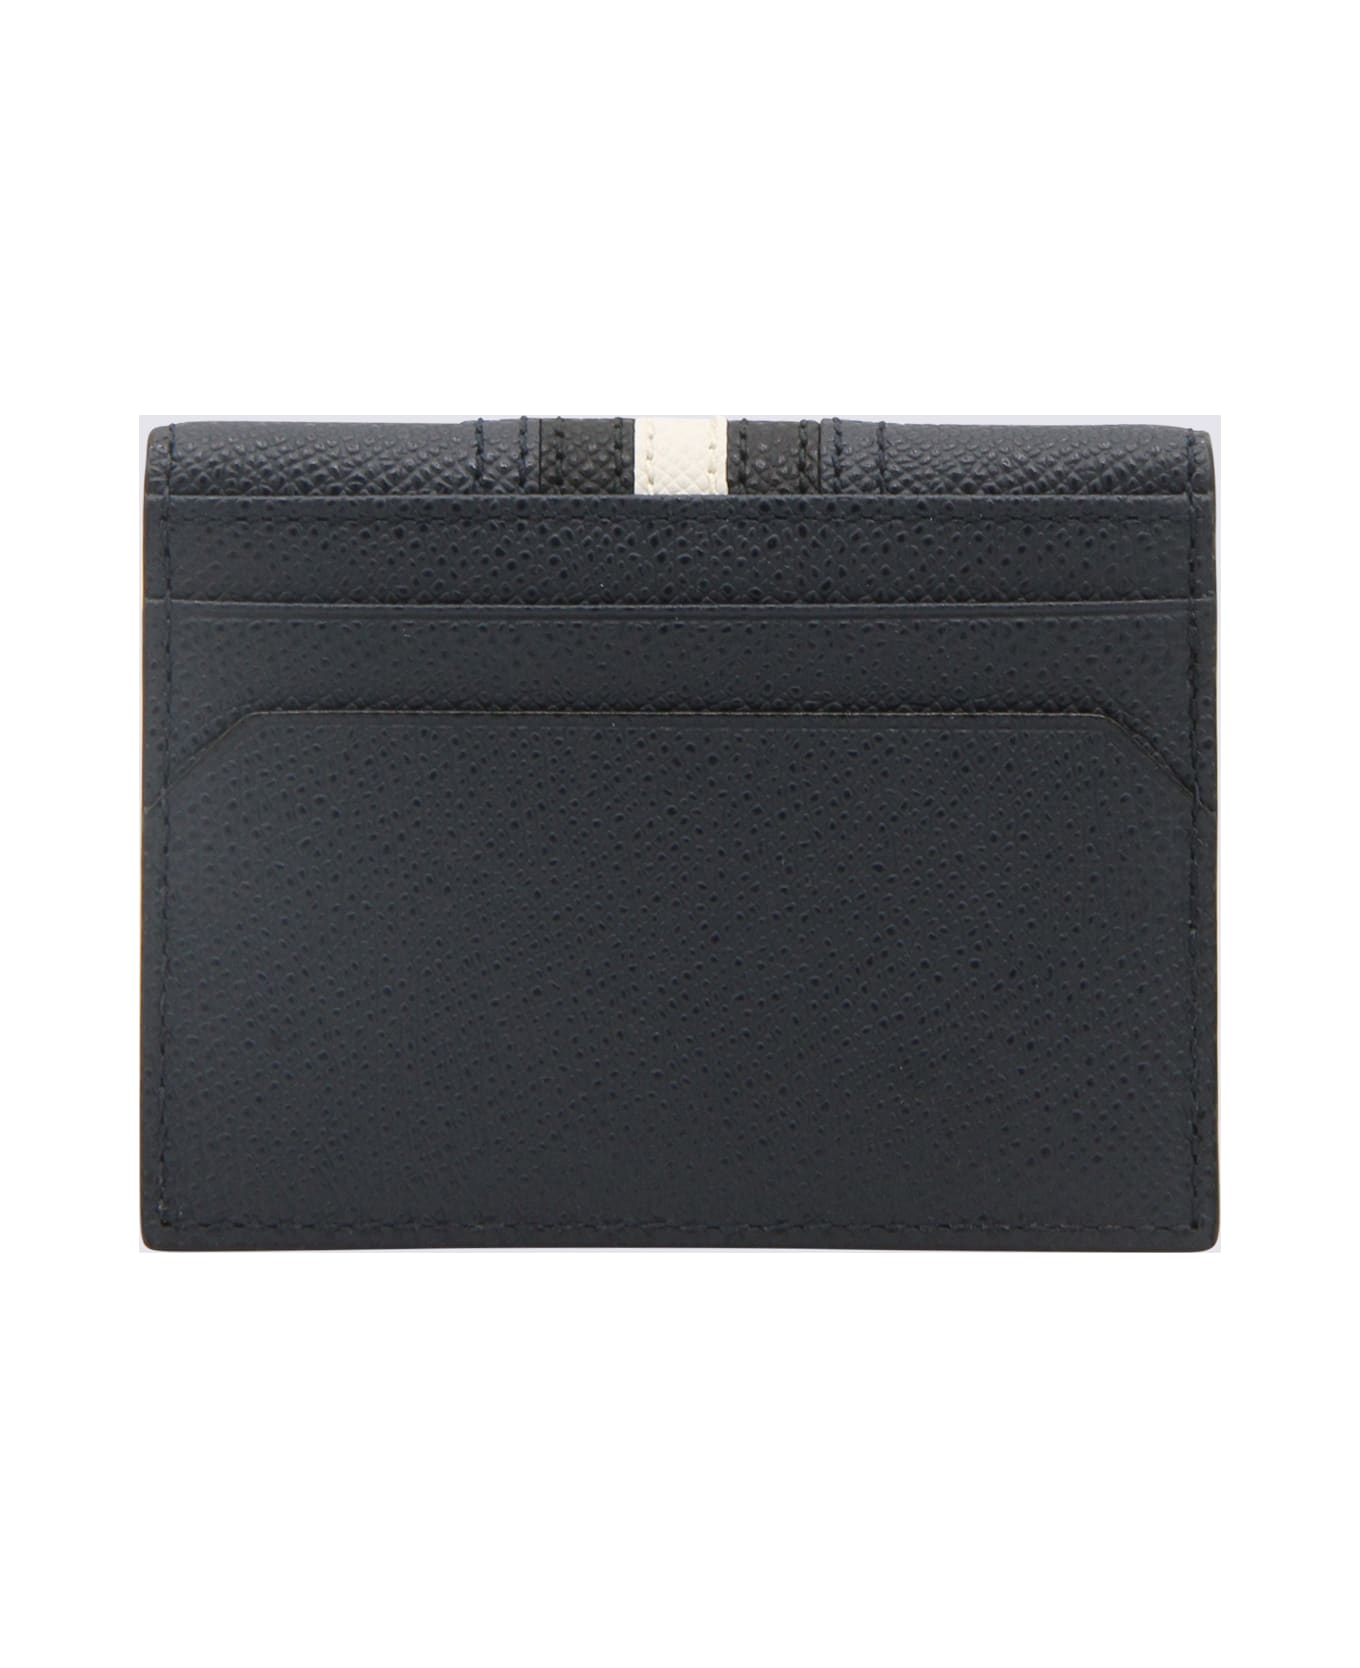 Bally Navy Blue, White And Black Leather Wallet - NEW BLUE